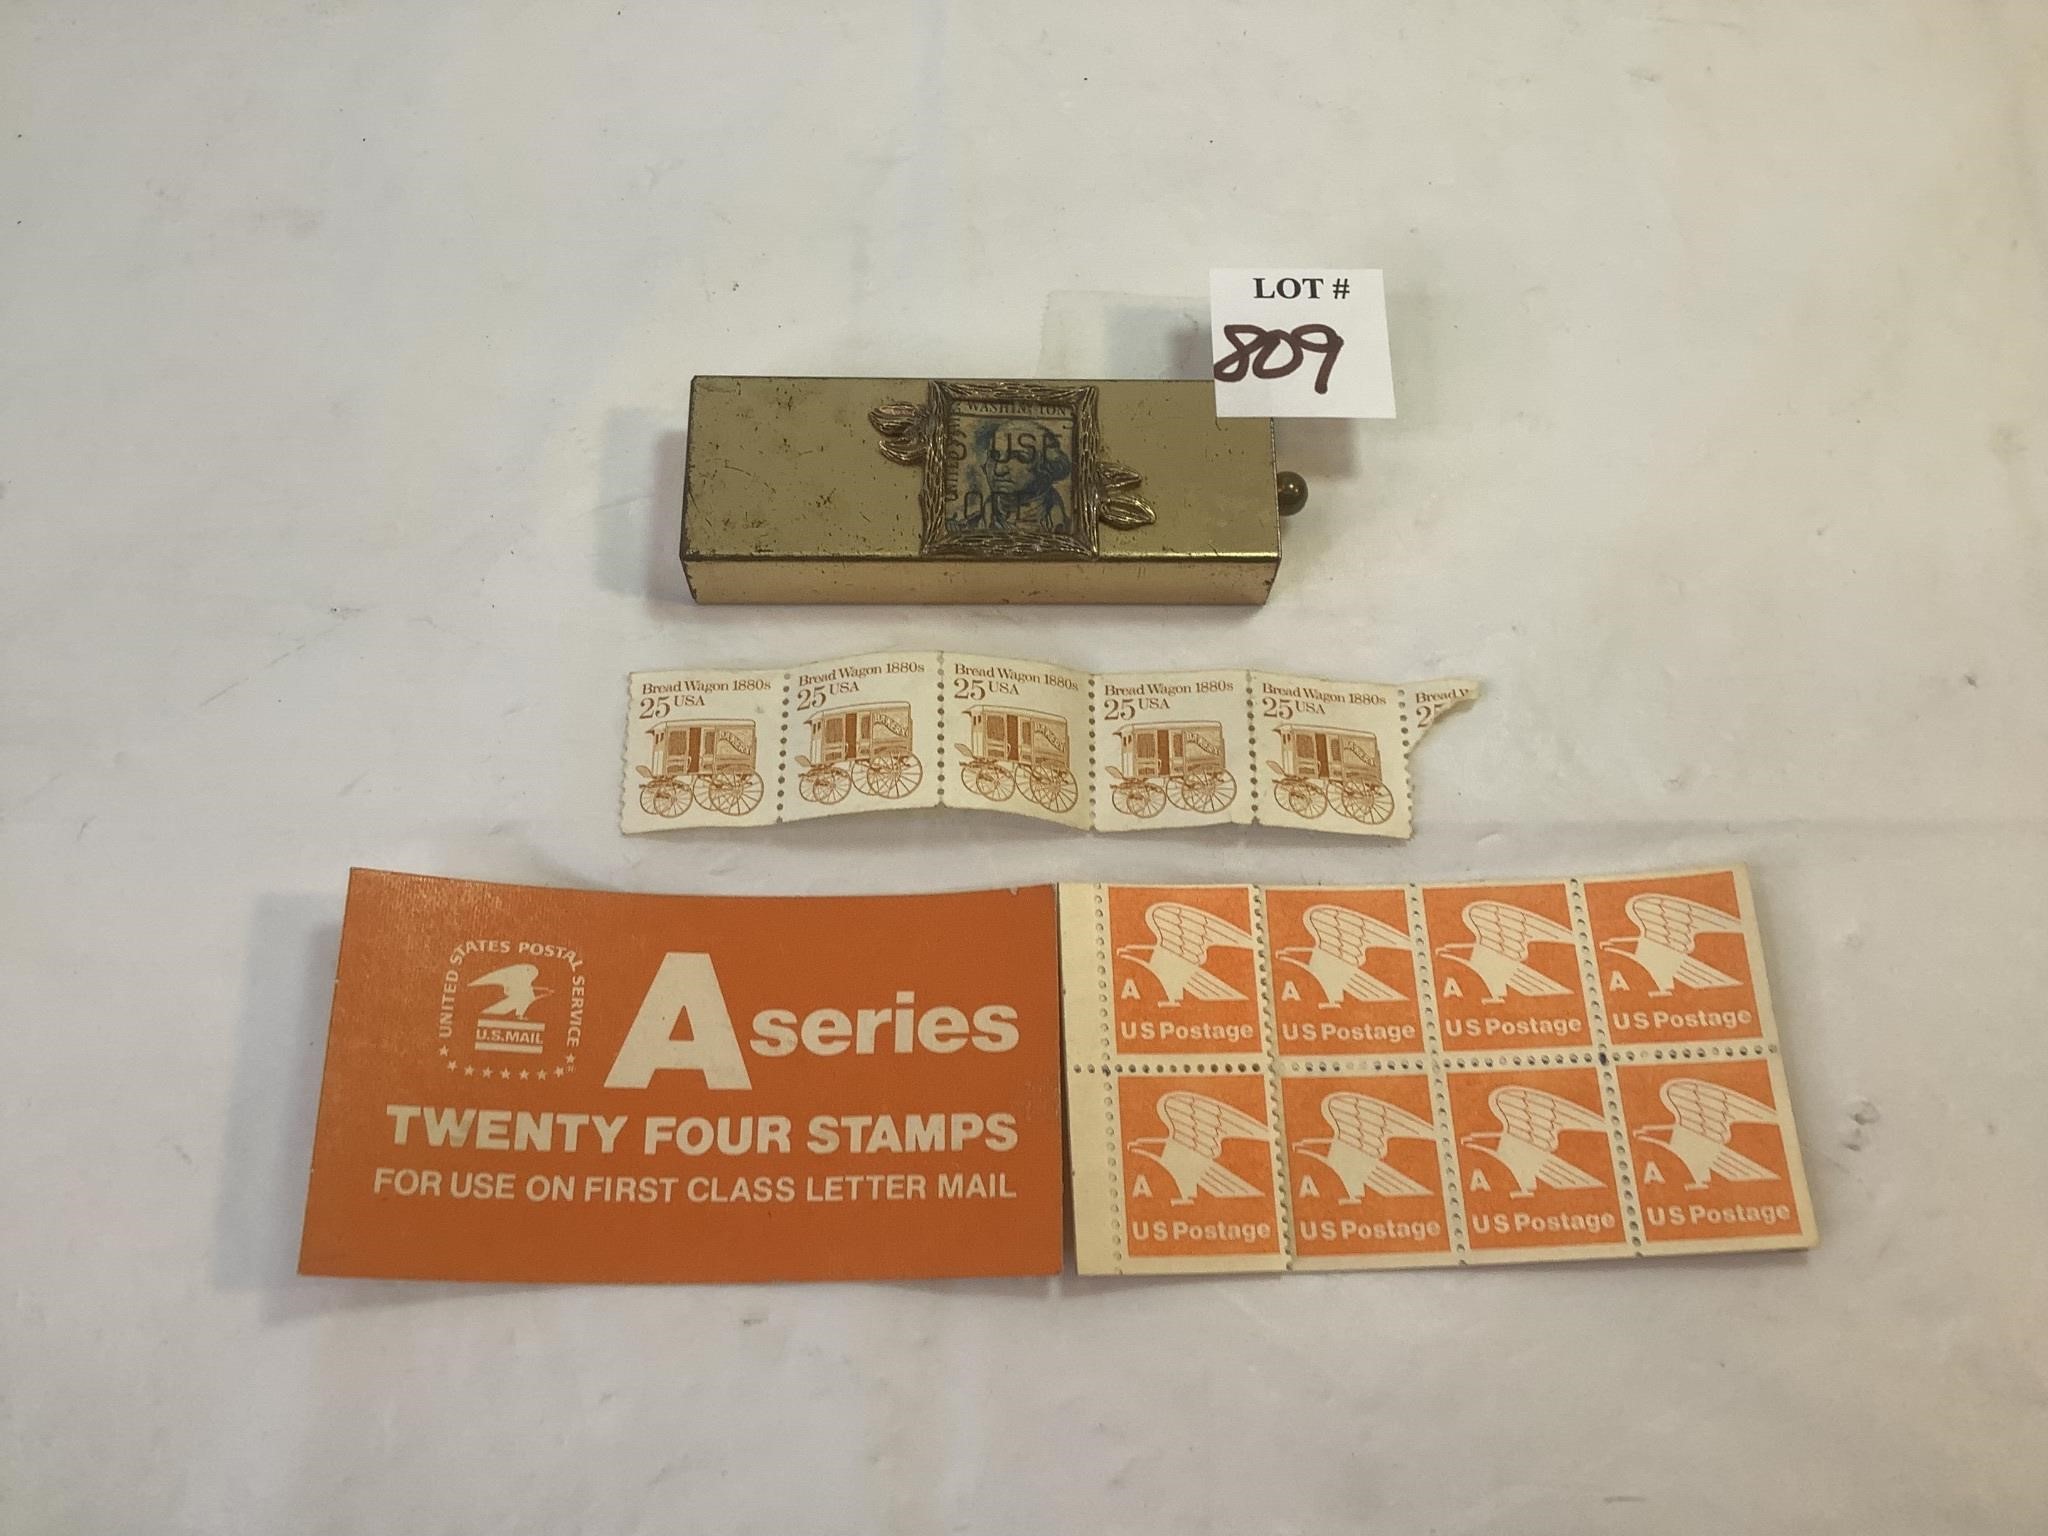 Stamp Box with Washington Stamp & Asst Stamps